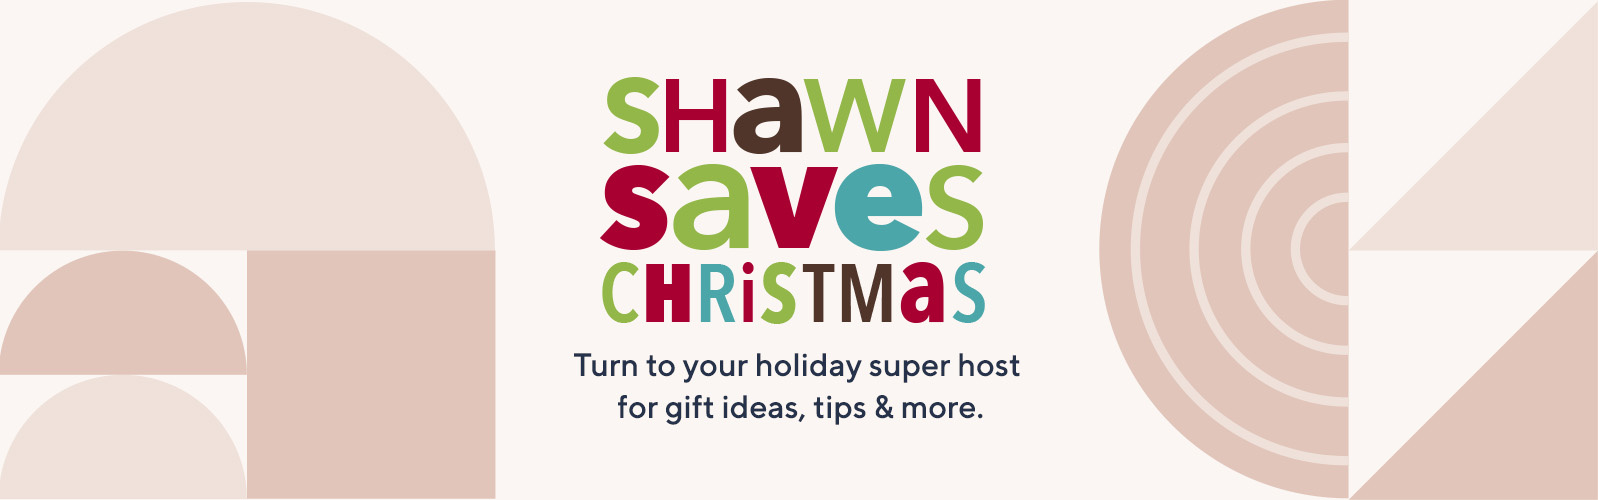 Shawn Saves Christmas. Turn to your holiday super host for gift ideas, tips, & more.